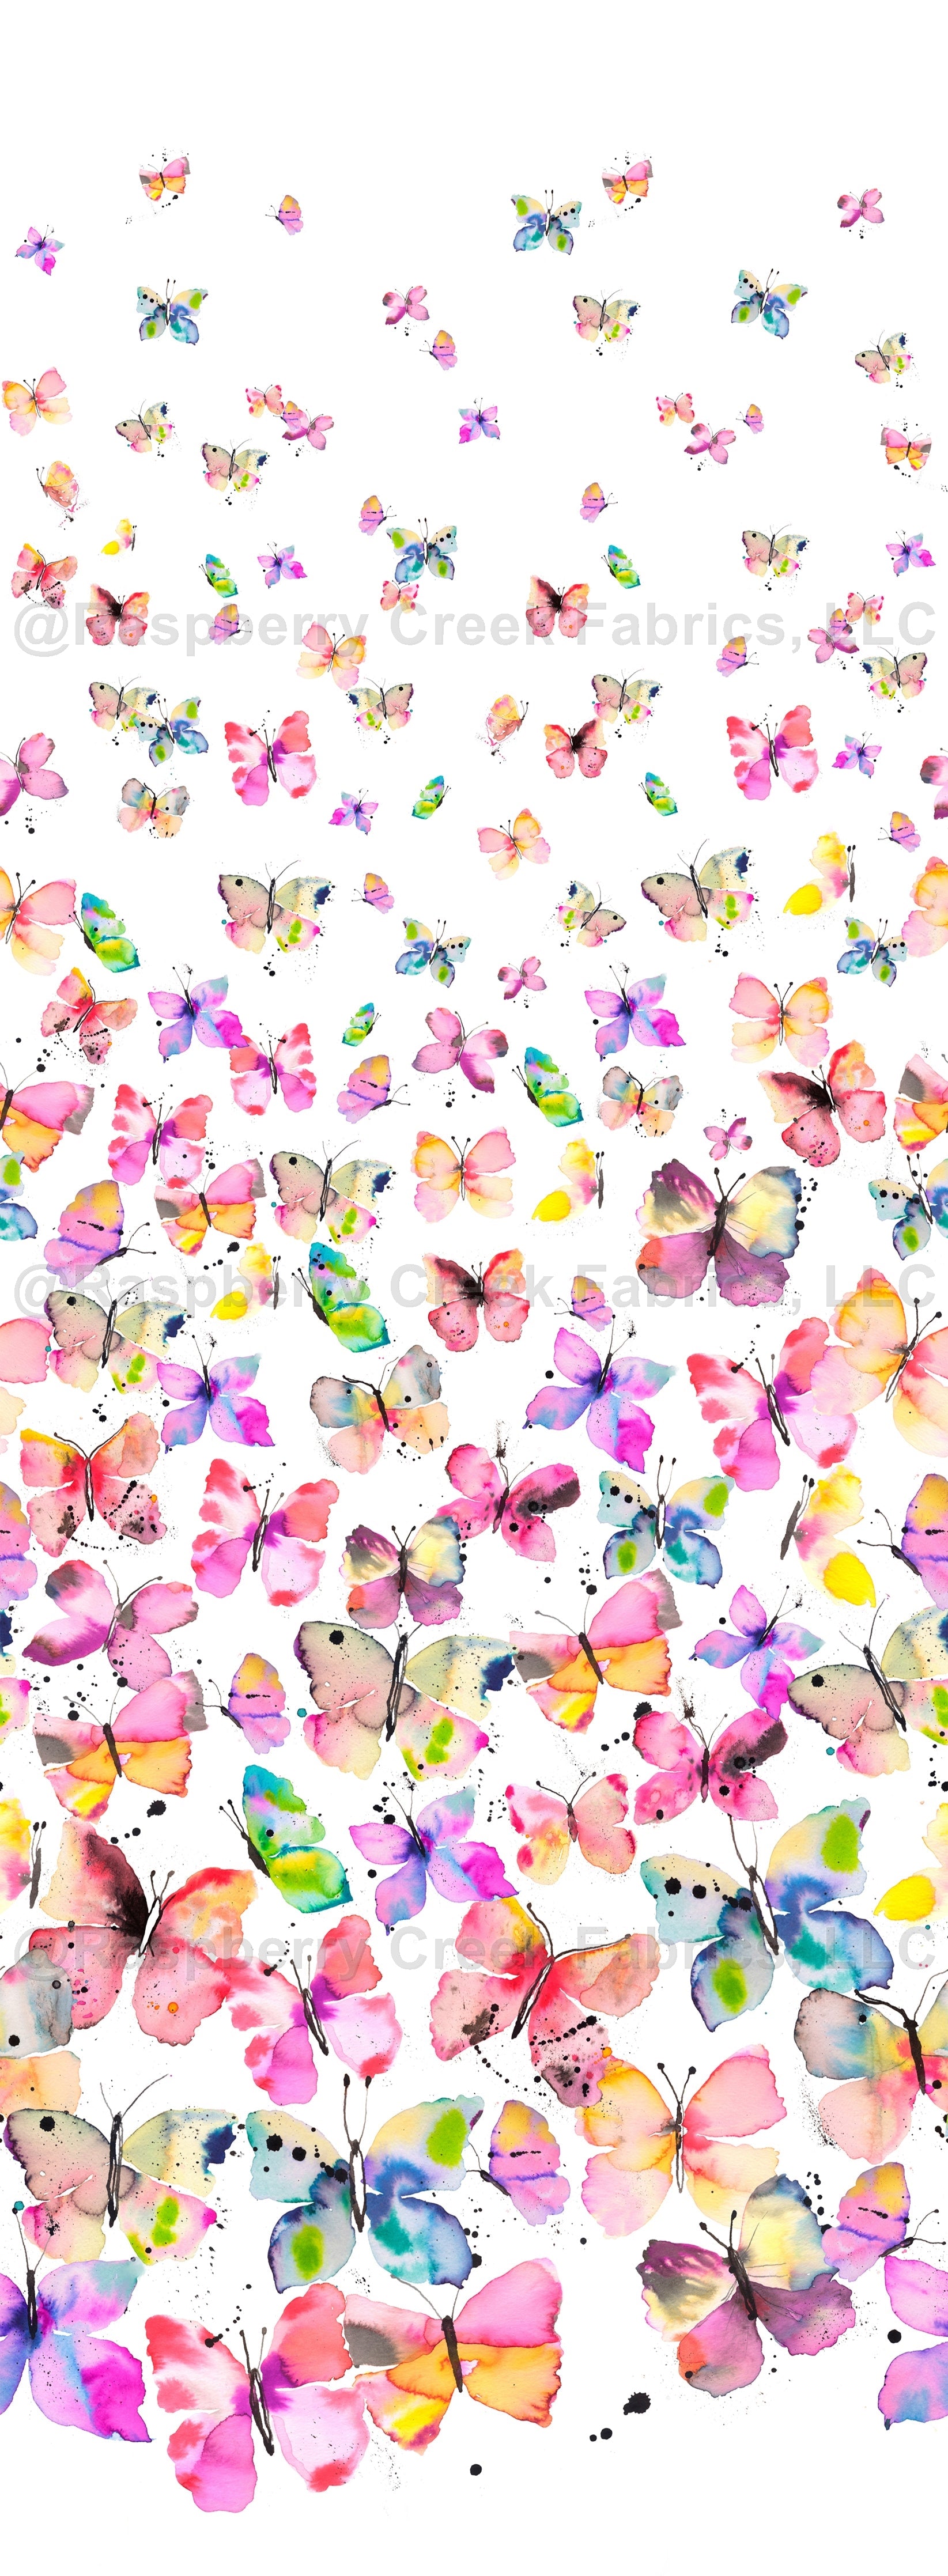 Watercolor Colorful Spring Butterflies Fabric, Raspberry Creek Fabrics, watermarked